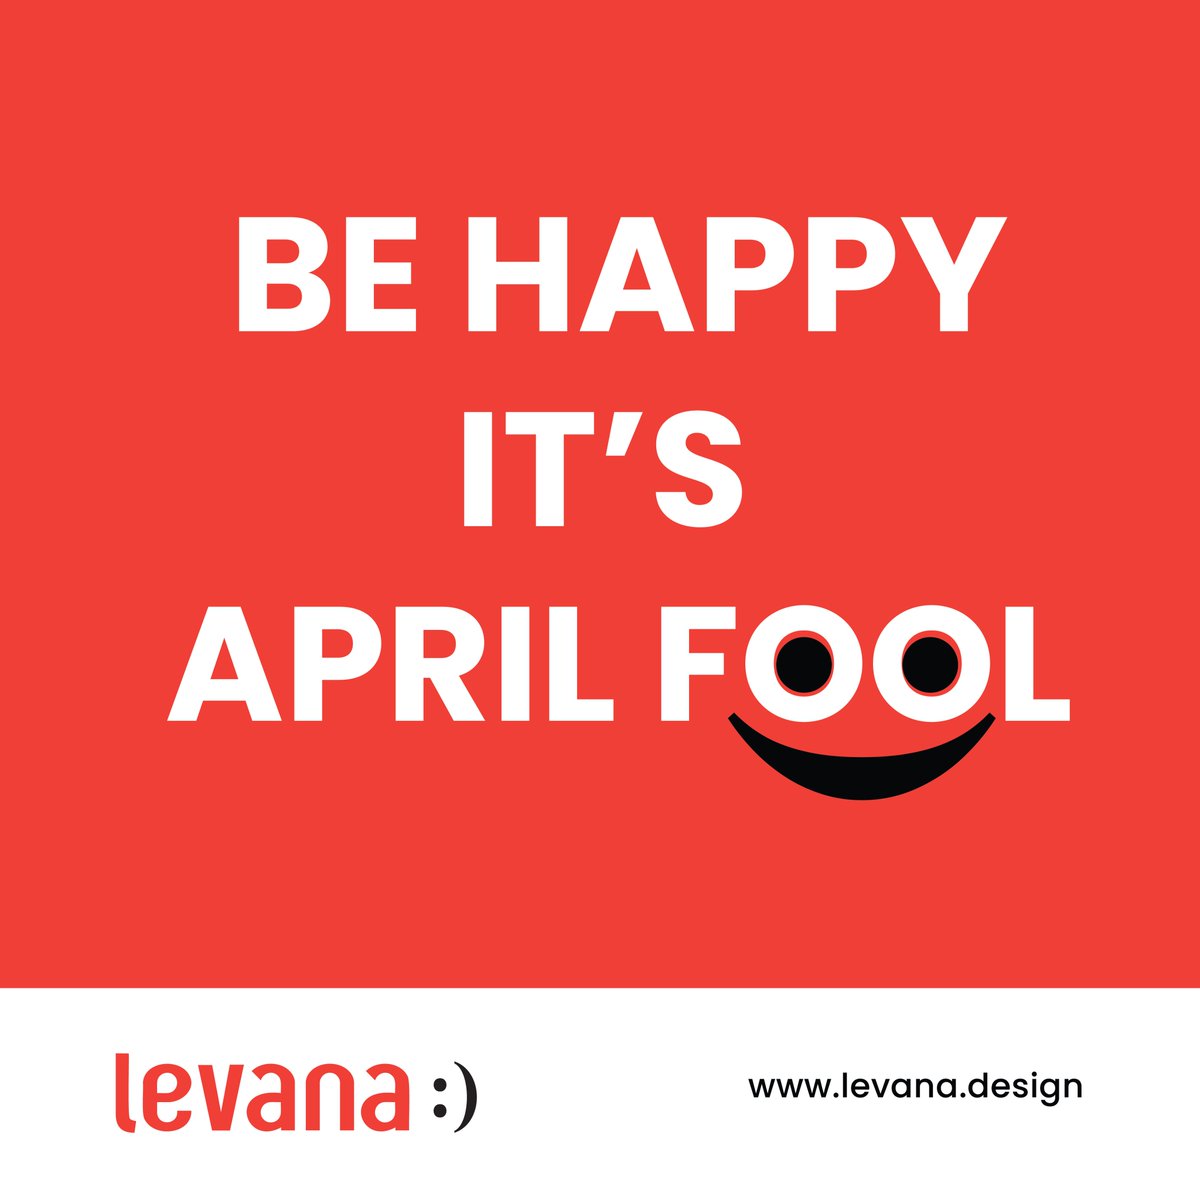 🎉 Exciting news! 🎉
We're kicking off the new financial year by giving away our services for FREE!🤑🔥

#happiness #newfinancialyear #freeservice #freeofcost #FreePackage #graphicdesign  #behappy #weekend #weekendvibes #AprilFoolsDay #AprilFools #AprilMonth #levanacommunications